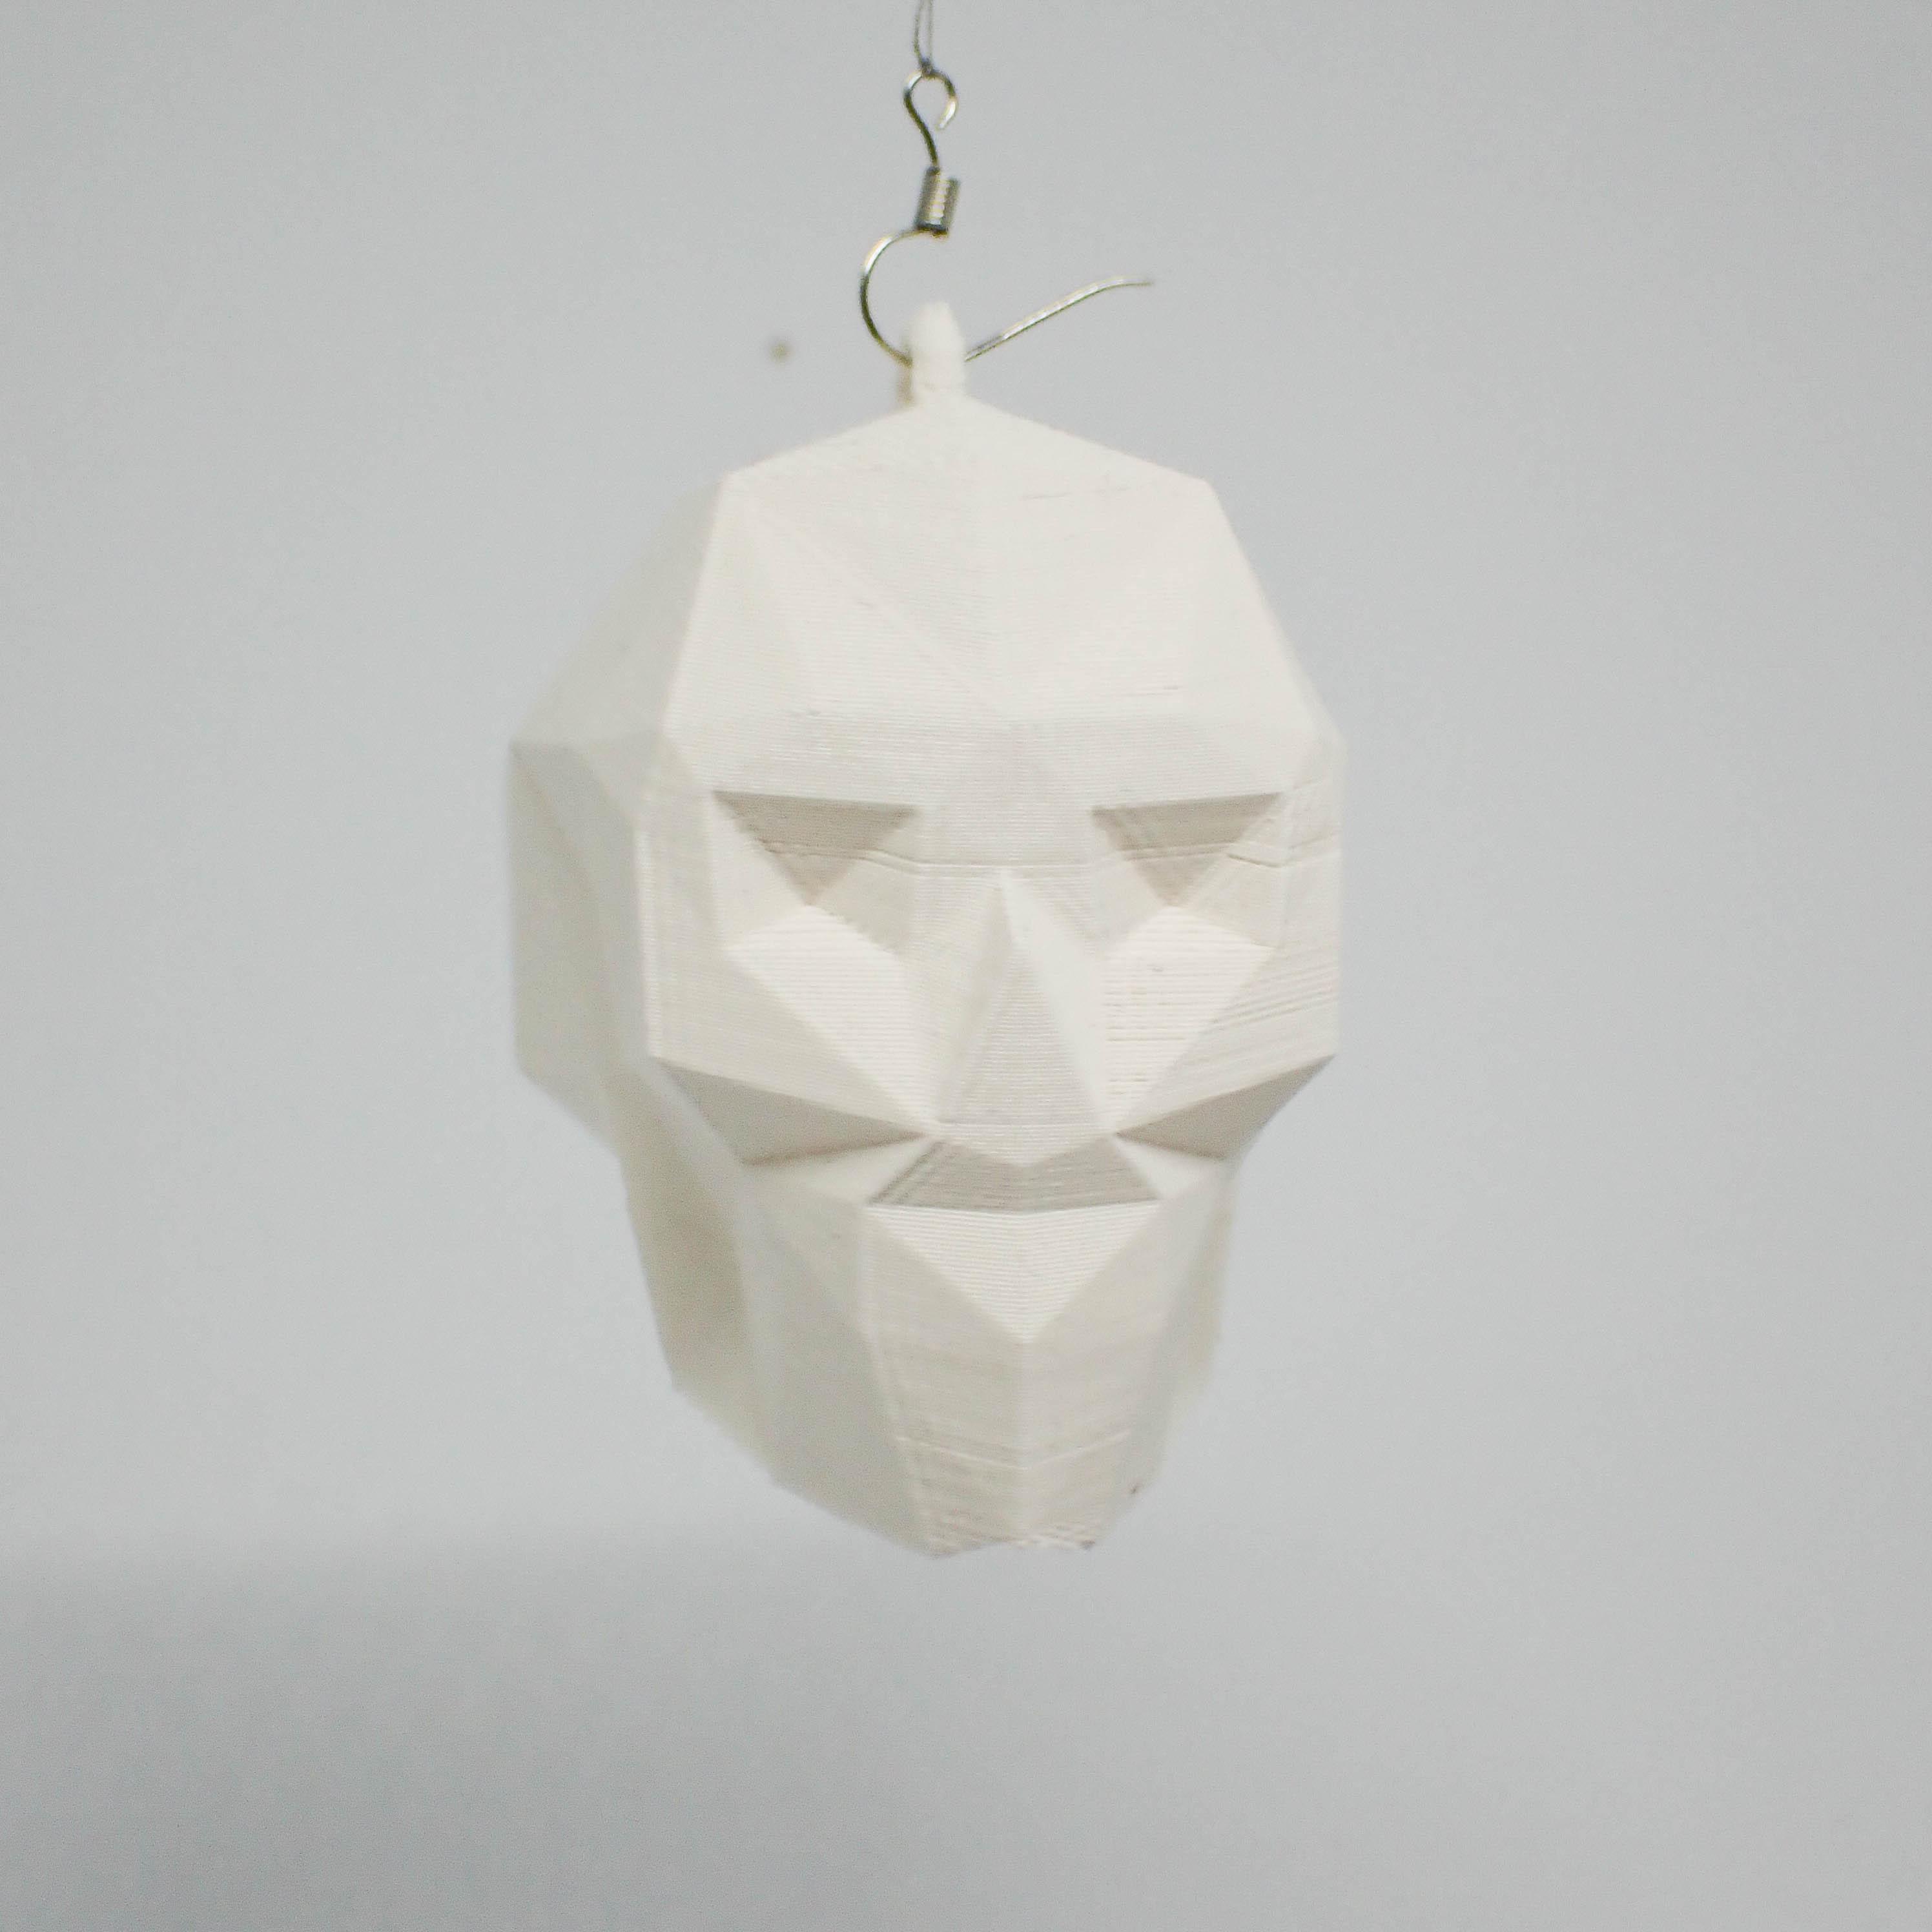 Low poly skull Christmas ornaments tree 3d model